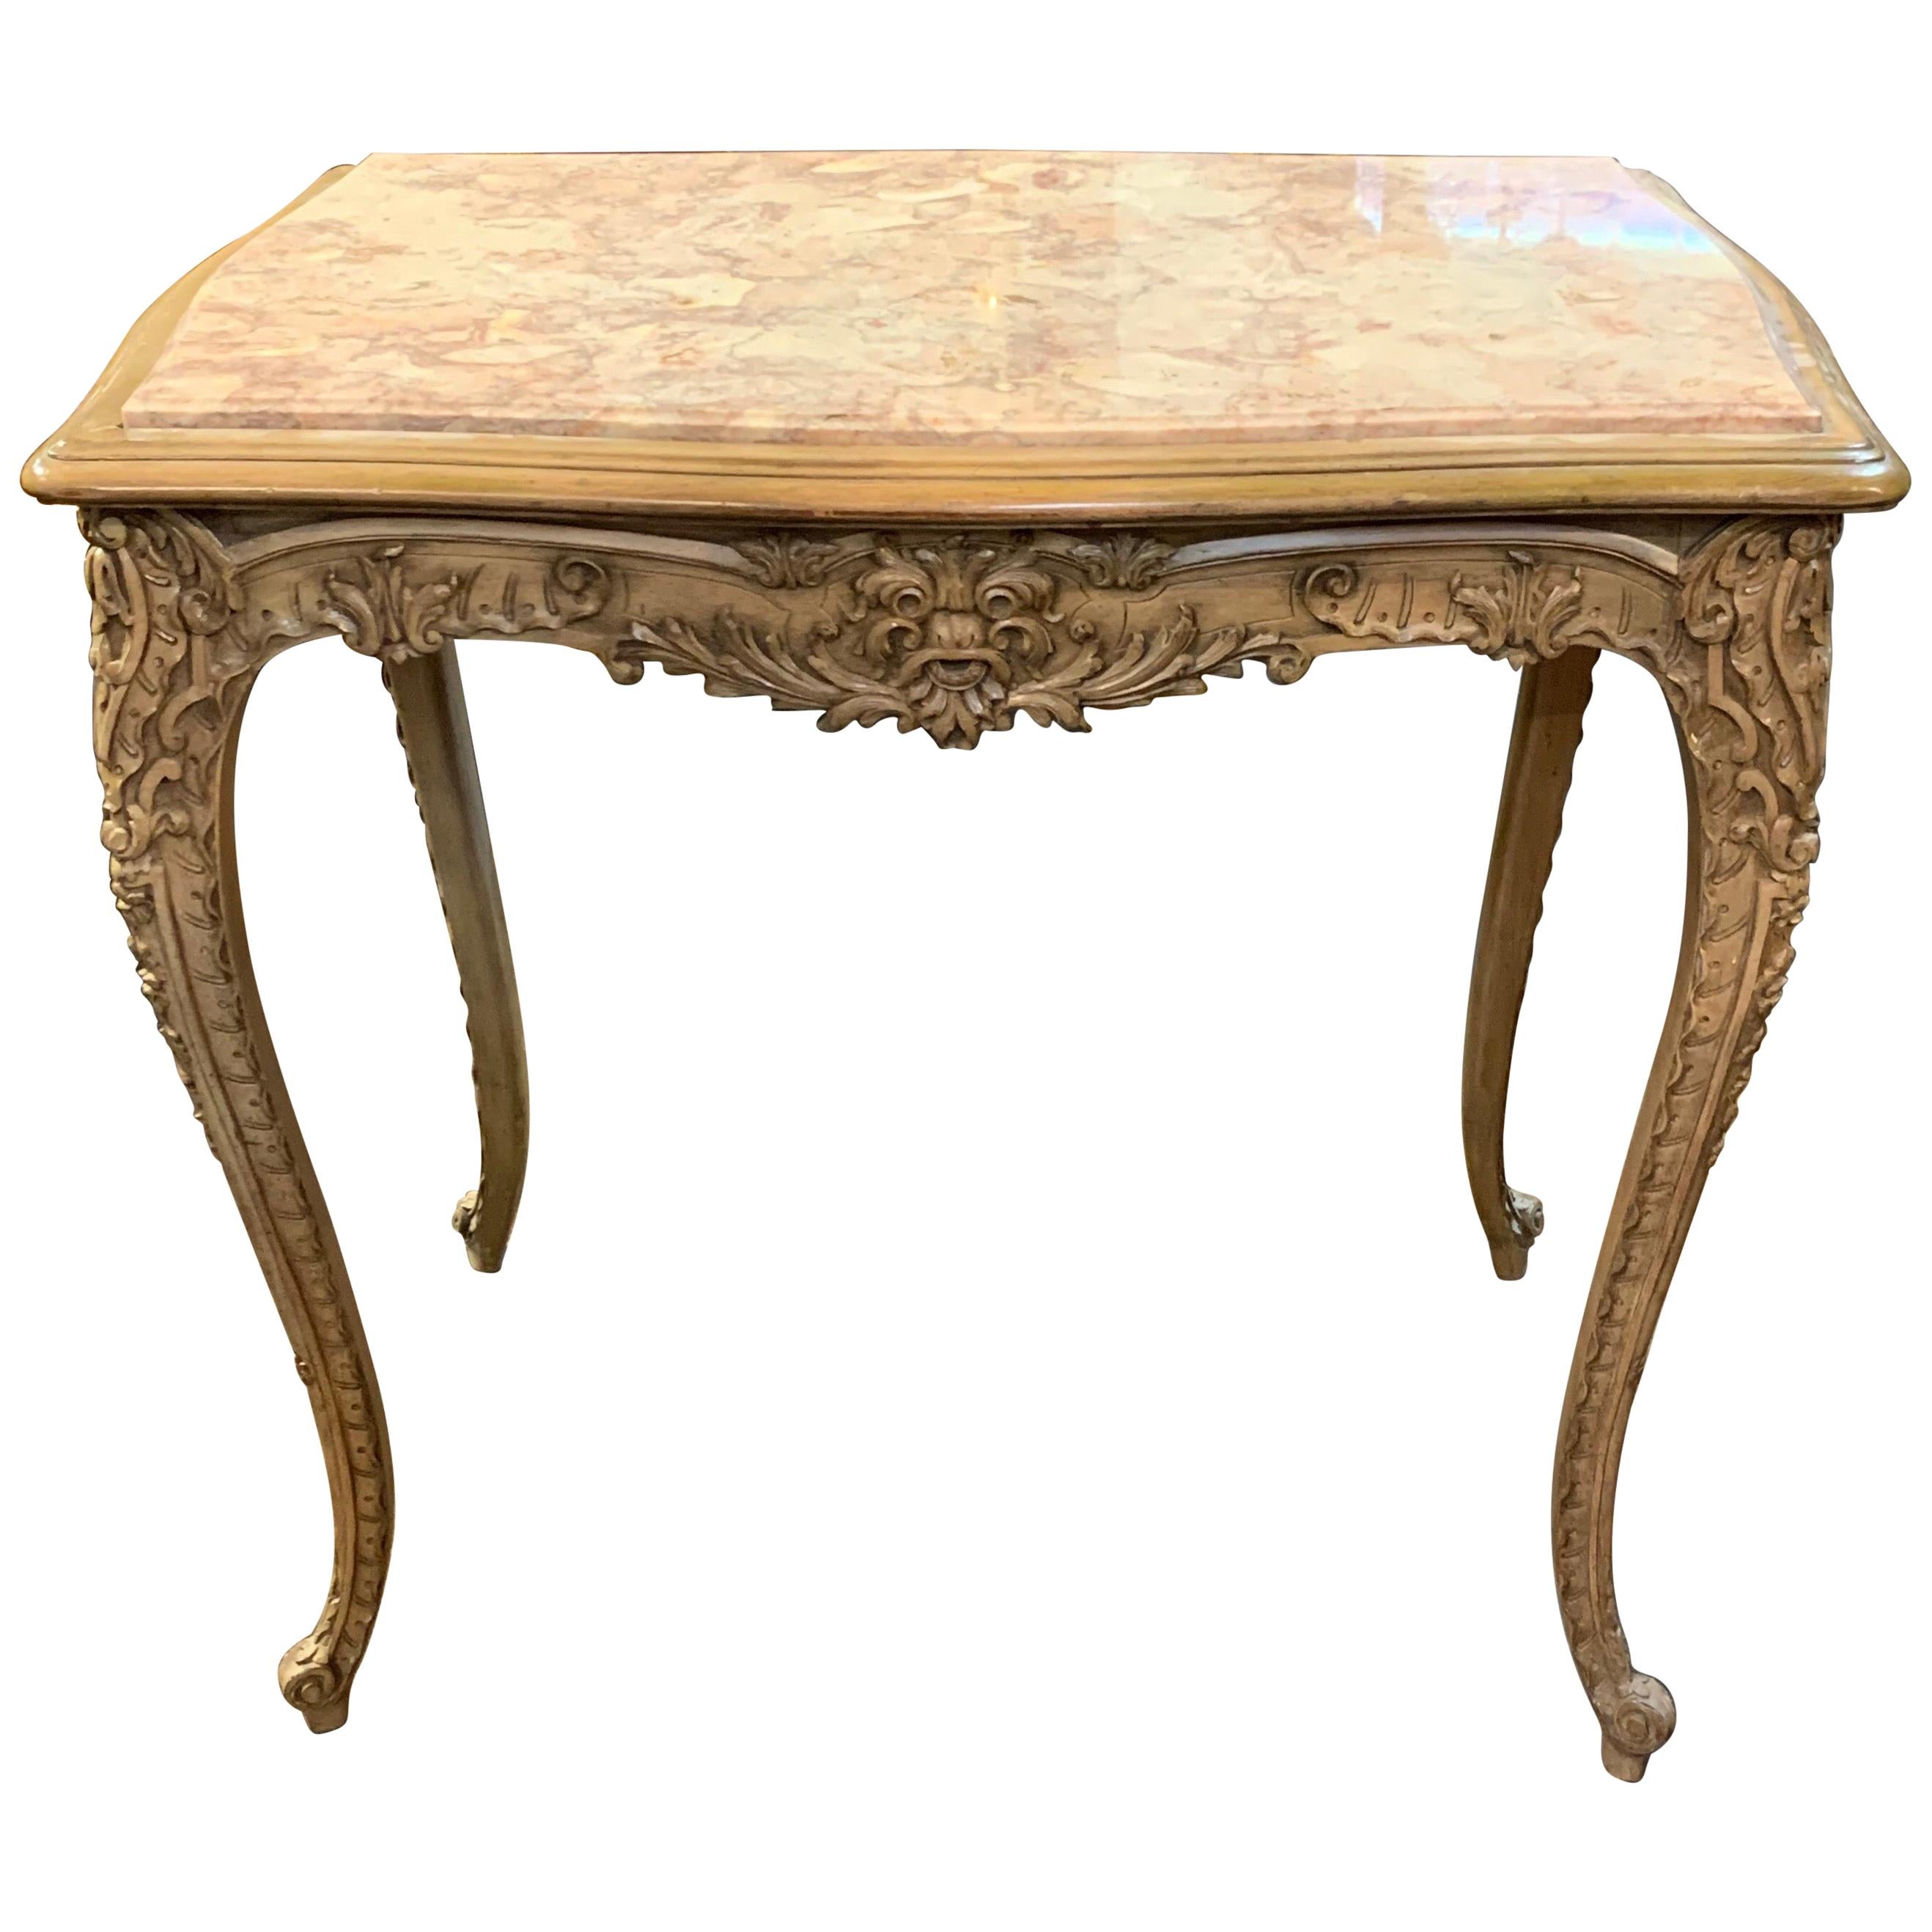 French Louis XV Style Painted and Lacquered Salon Table